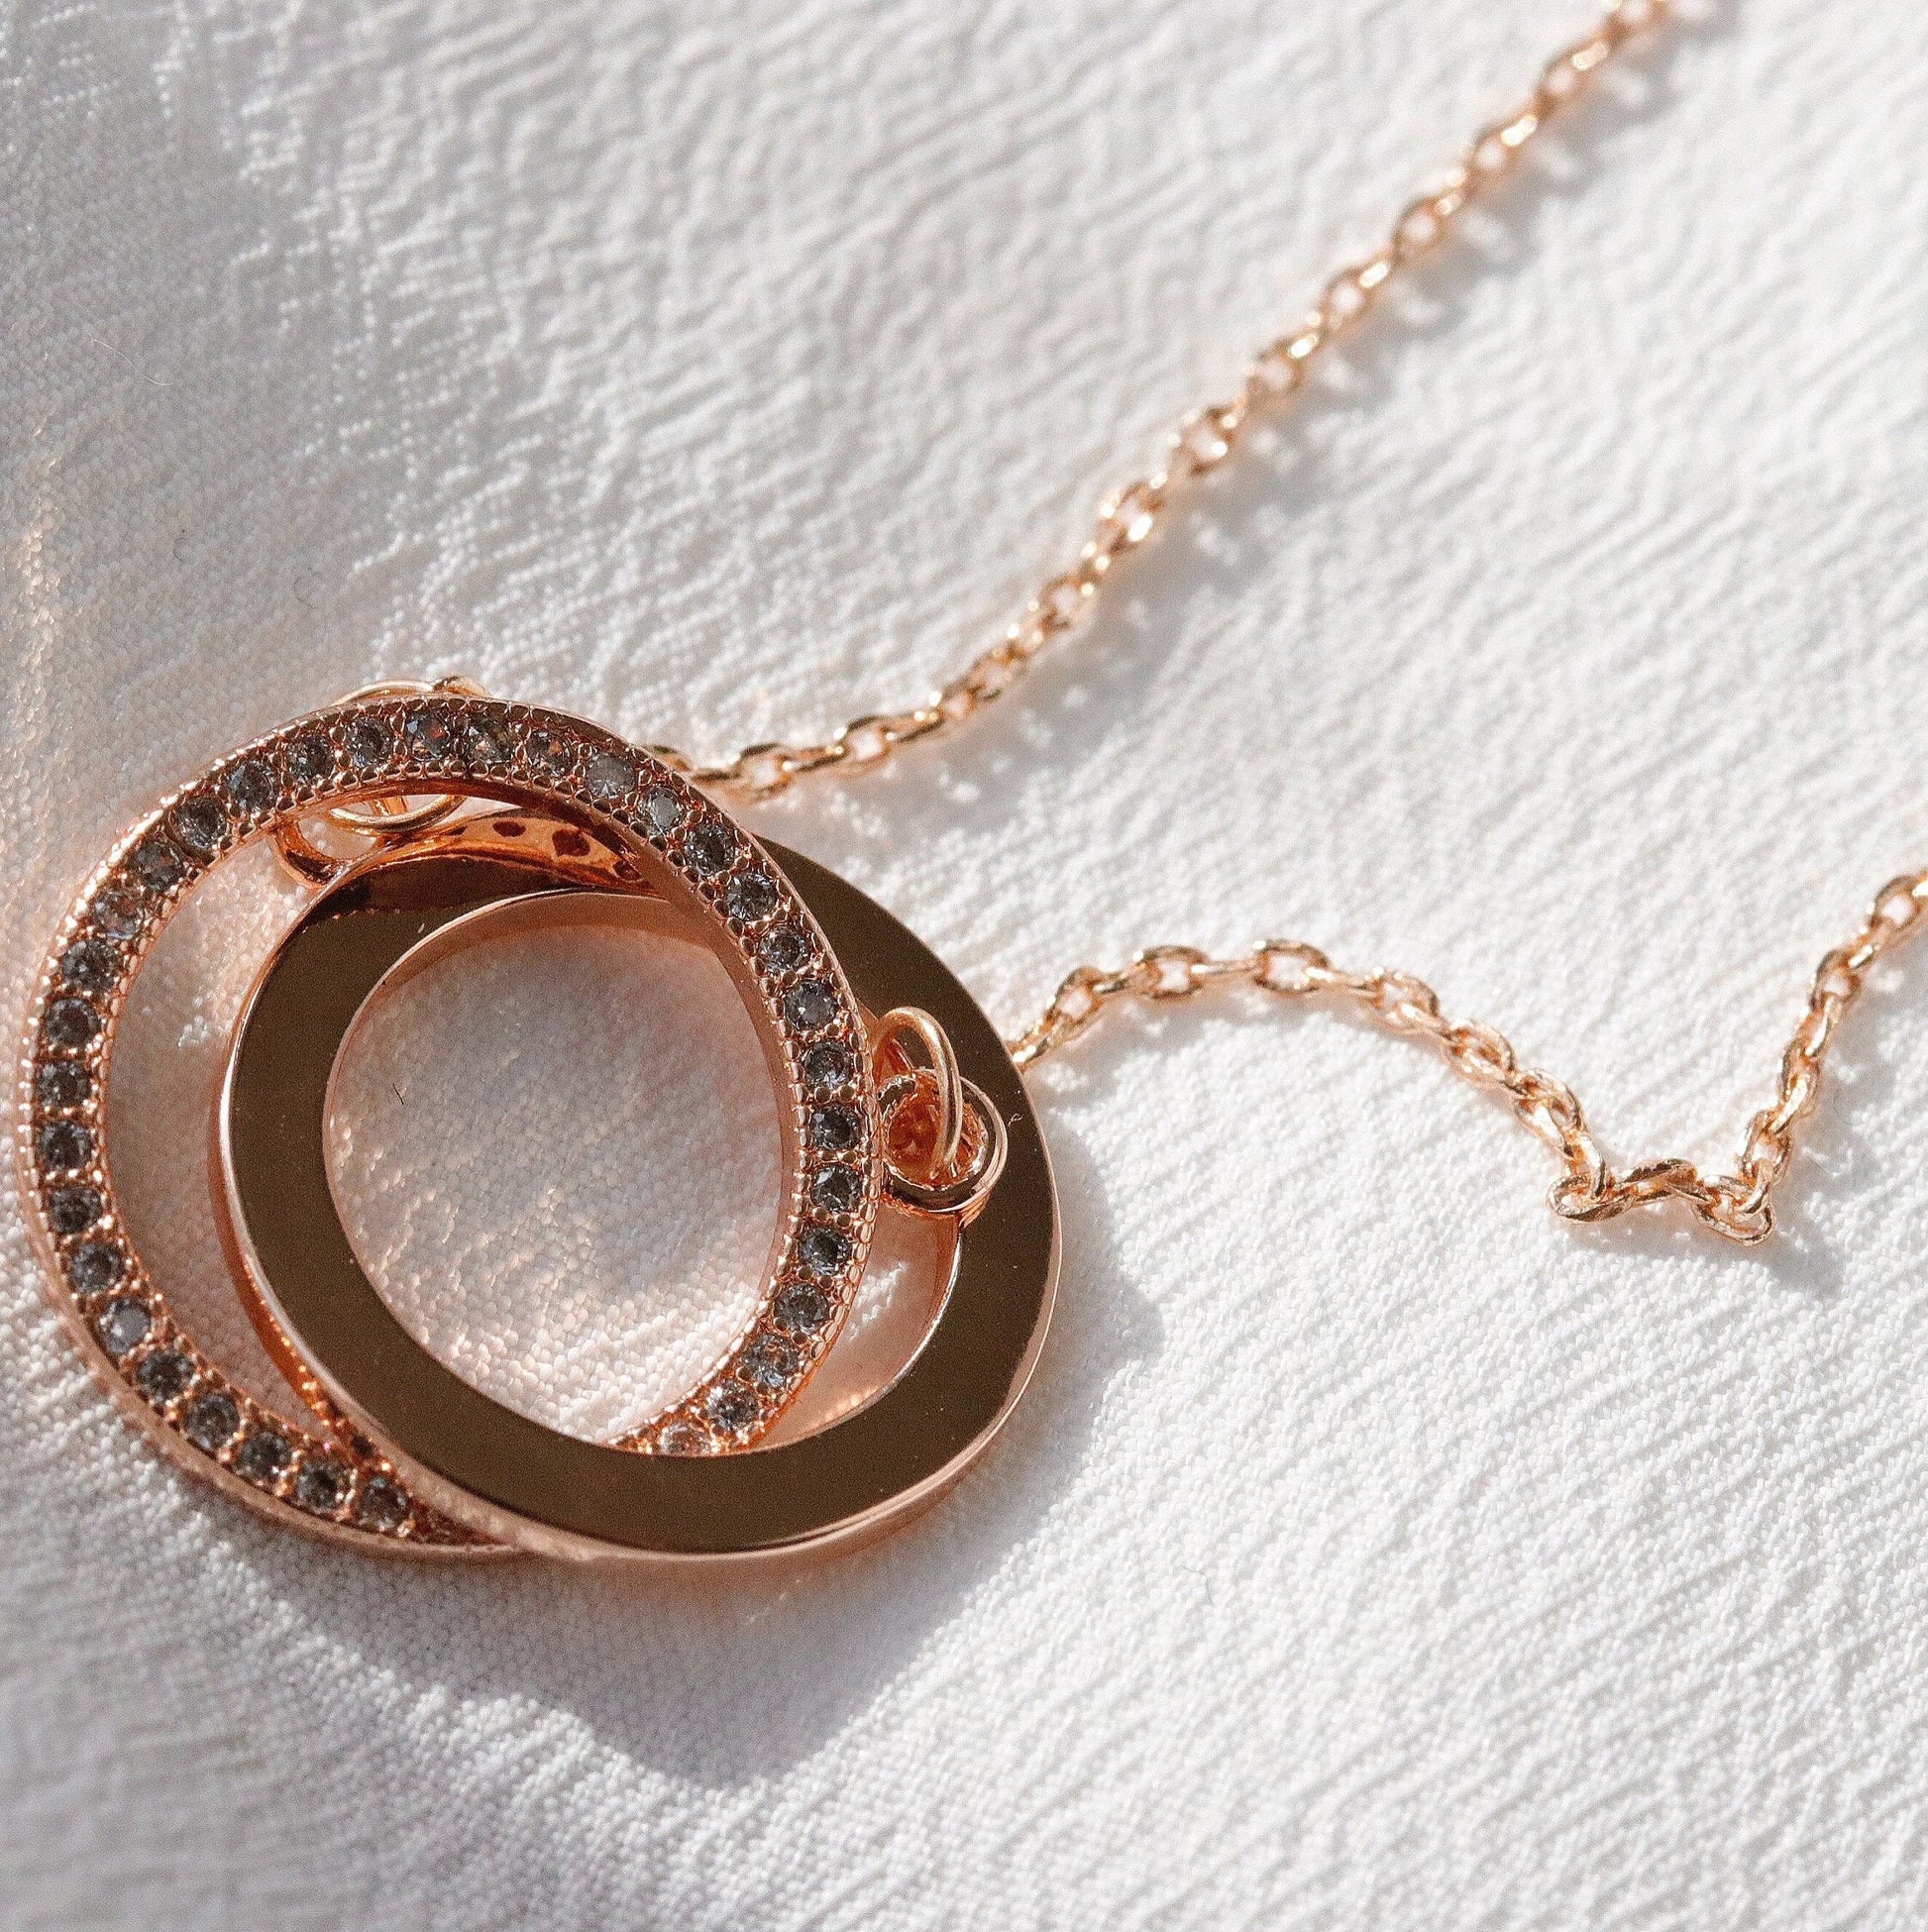 Interlinking Circle or Heart Gift Necklace / SYMBOLOGY / Marvellous Mum Necklace in Silver Gold or Rose Gold / Family Gift / Mothers Day